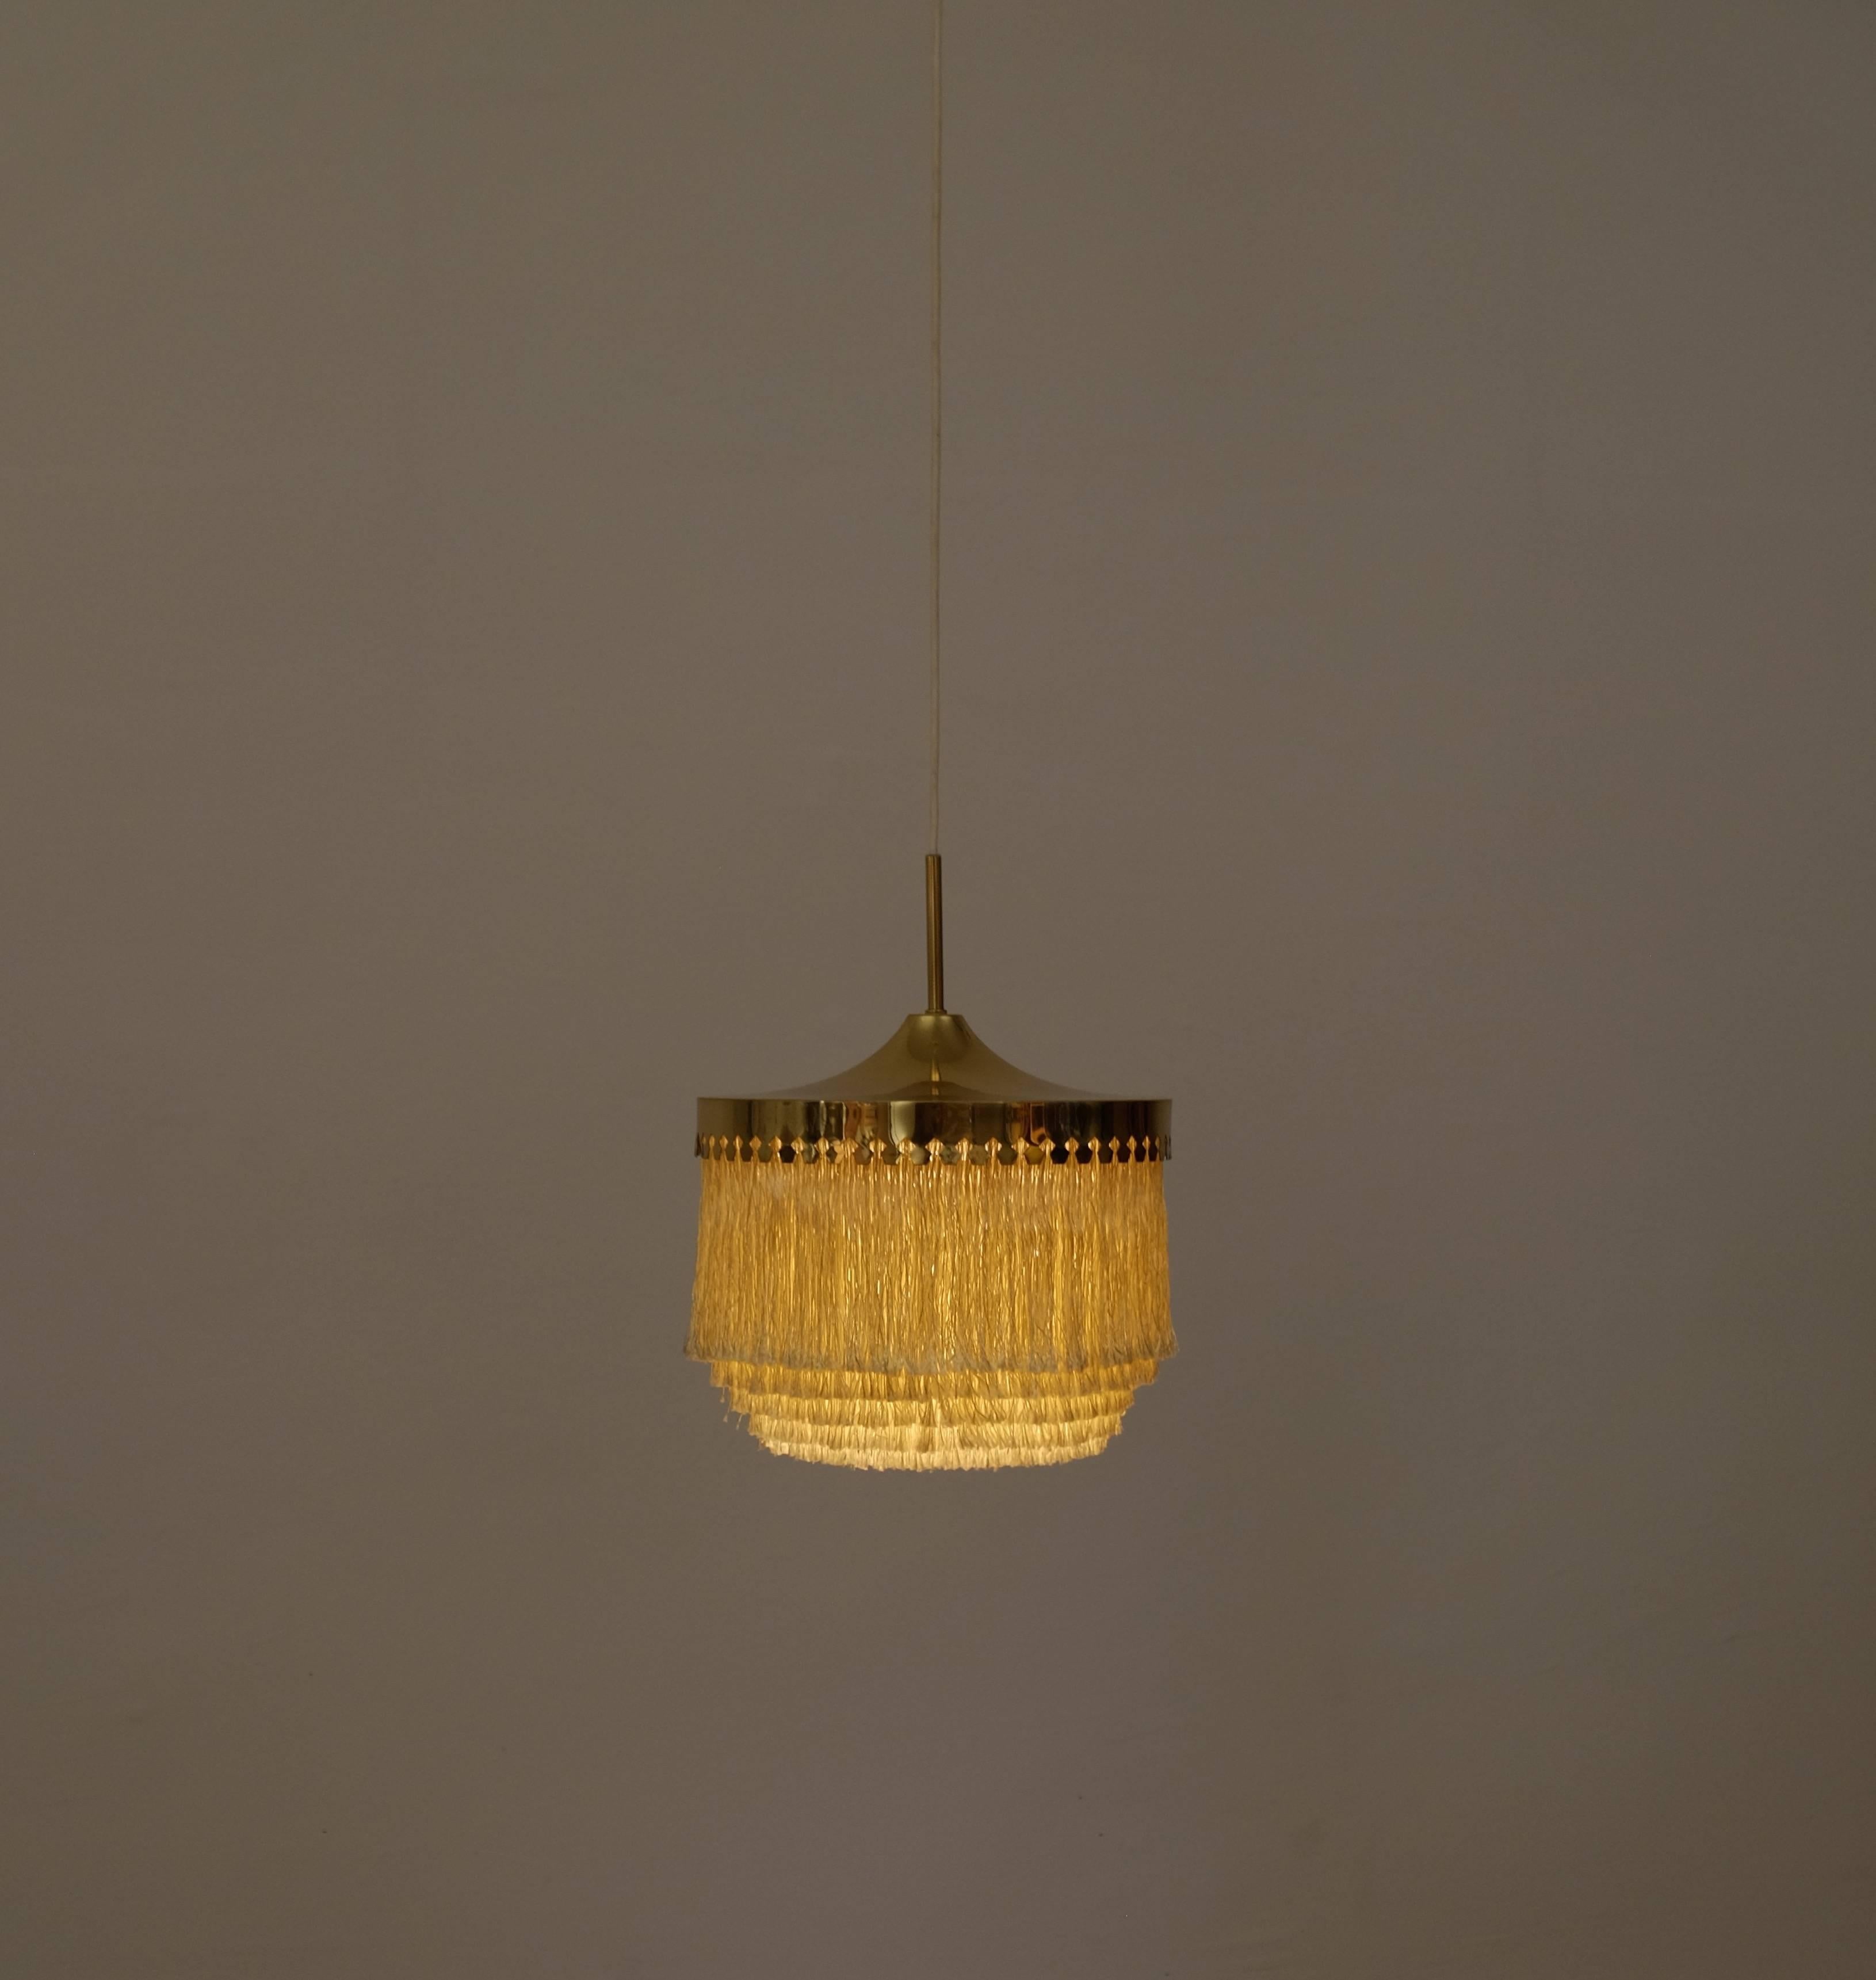 Champagne colored silk fringes pendant light with brass frame.
Great original condition. Fitted with one E27 socket.

Measures: Height of the lamp only from bottom of fringes to top of brass crown approximately 36 cm, wire length 120-130